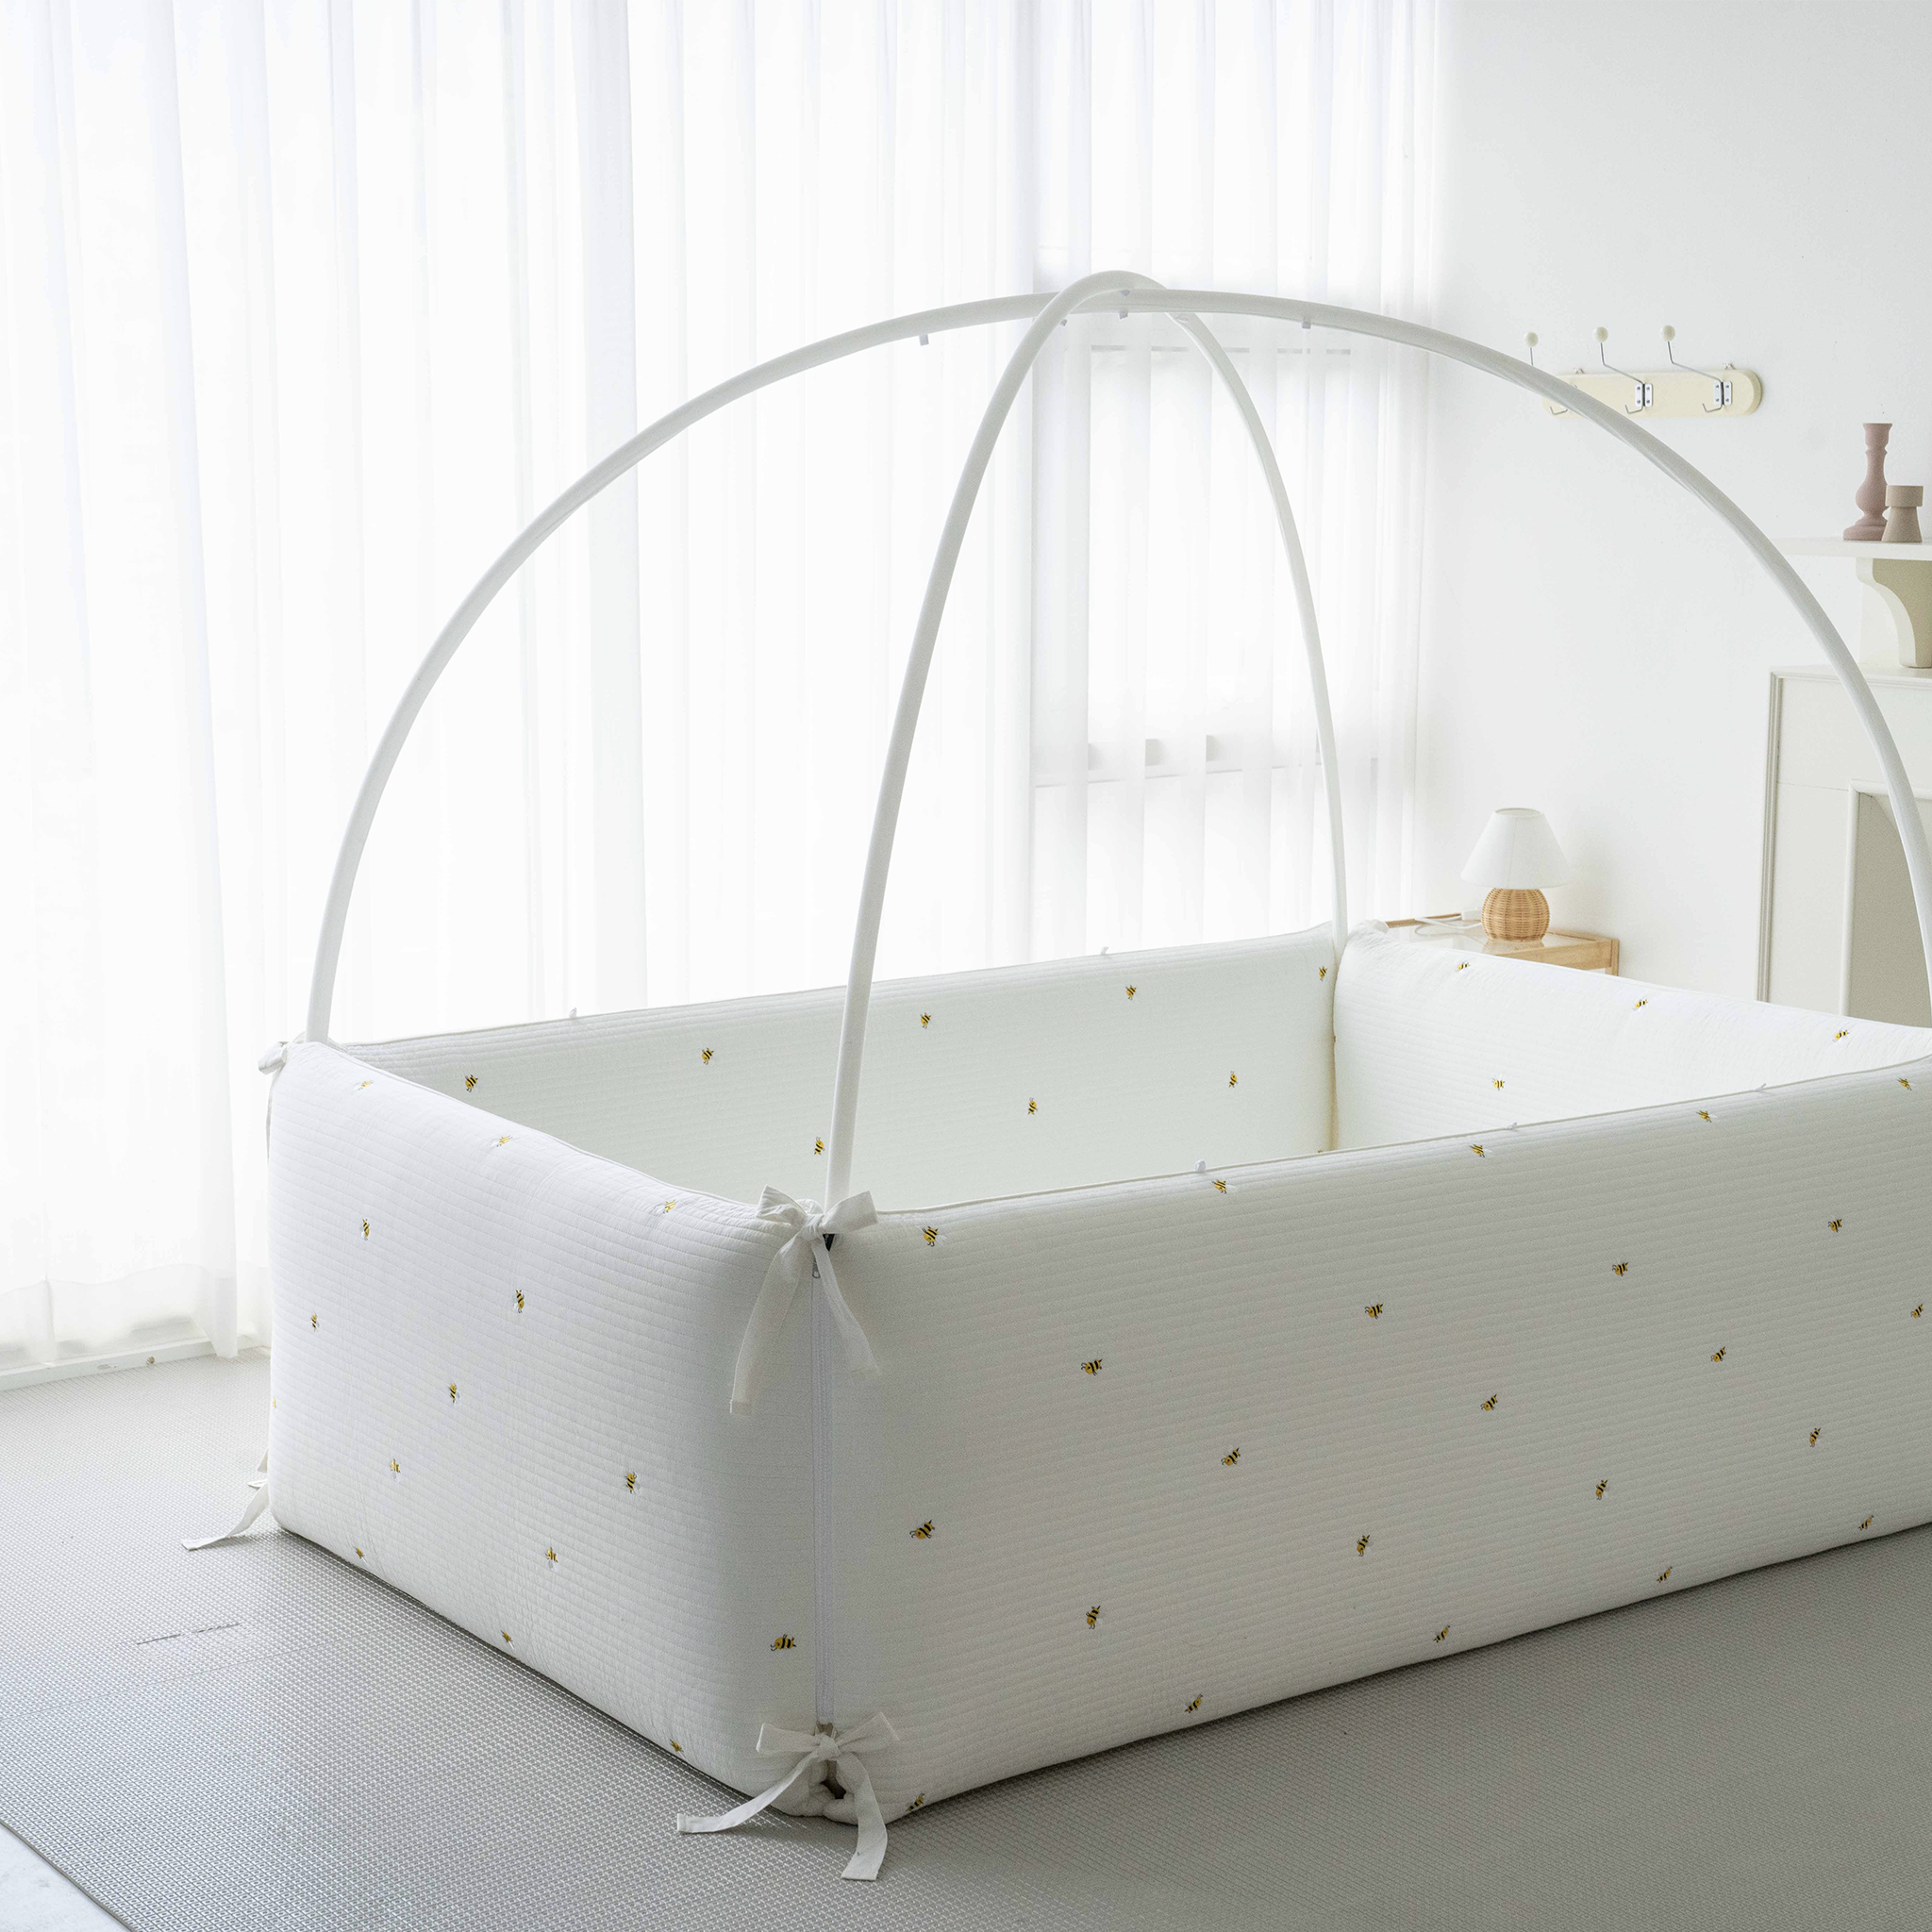 LOLBaby Cotton Embroidery Bumper Bed with Hanging Toy and Canopy - Honey Bee  (Pre Order End March 24)